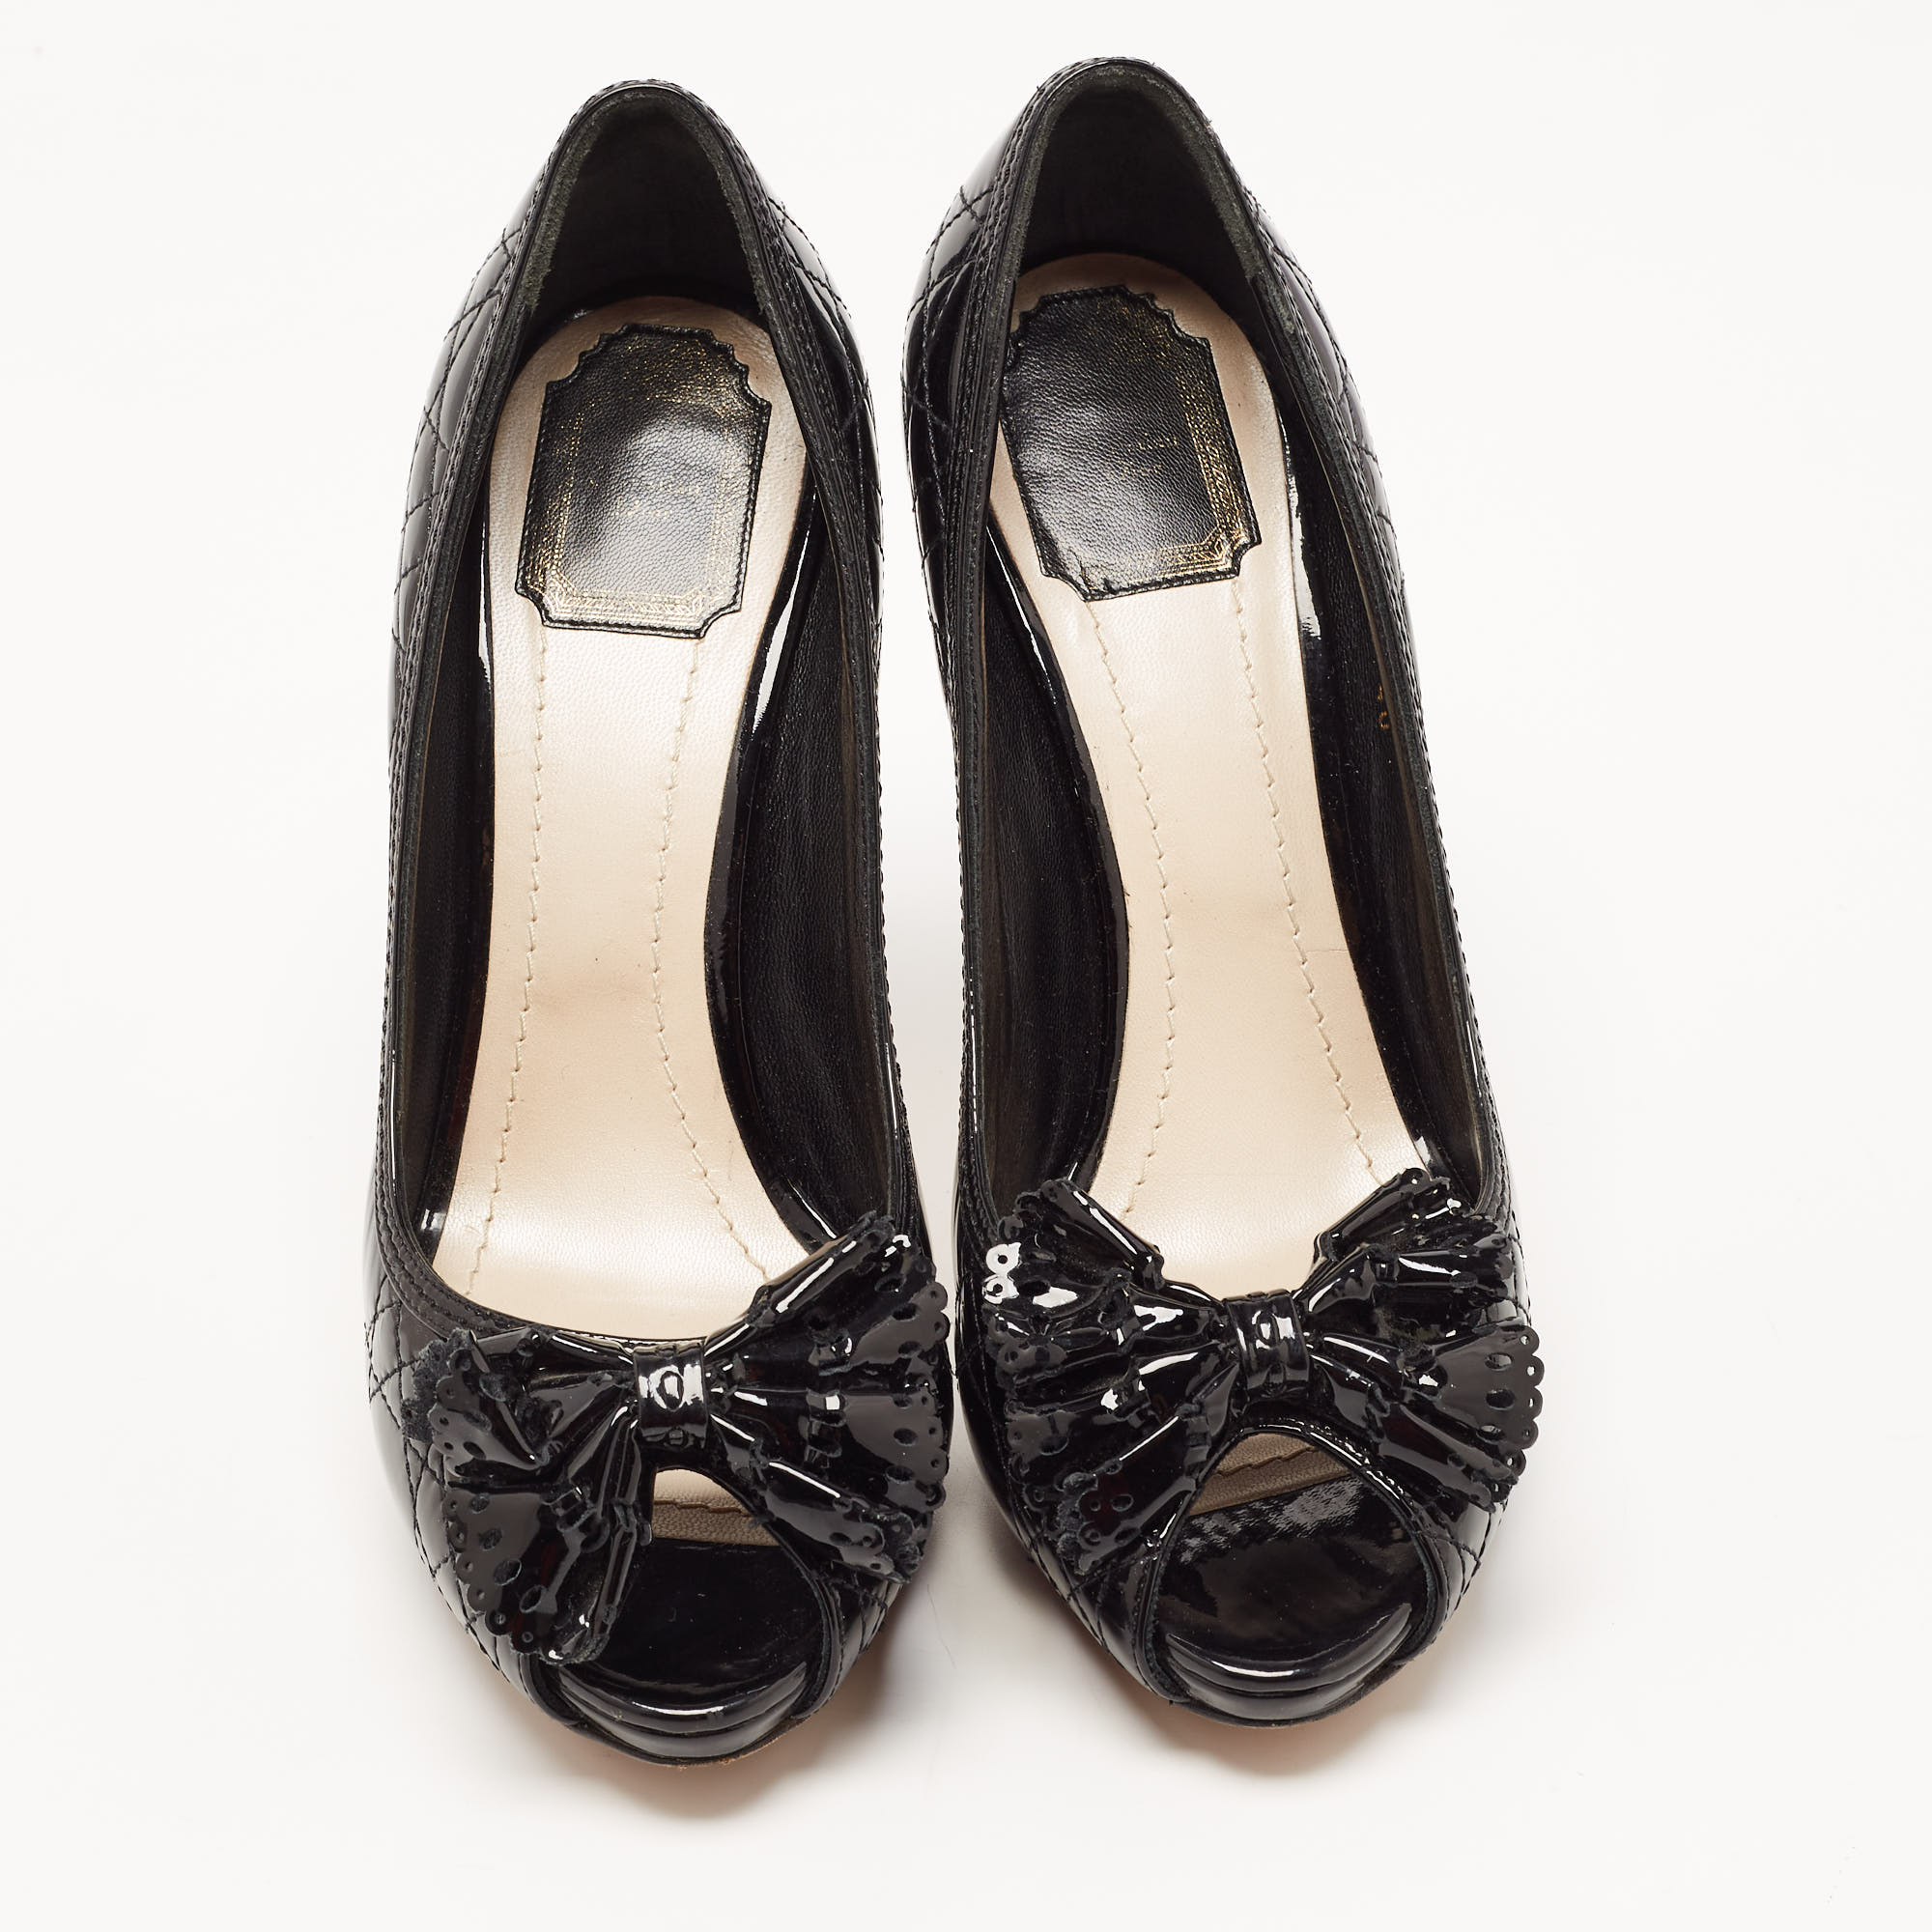 Dior Black Cannage Patent Leather Bow Peep Toe Pumps Size 40